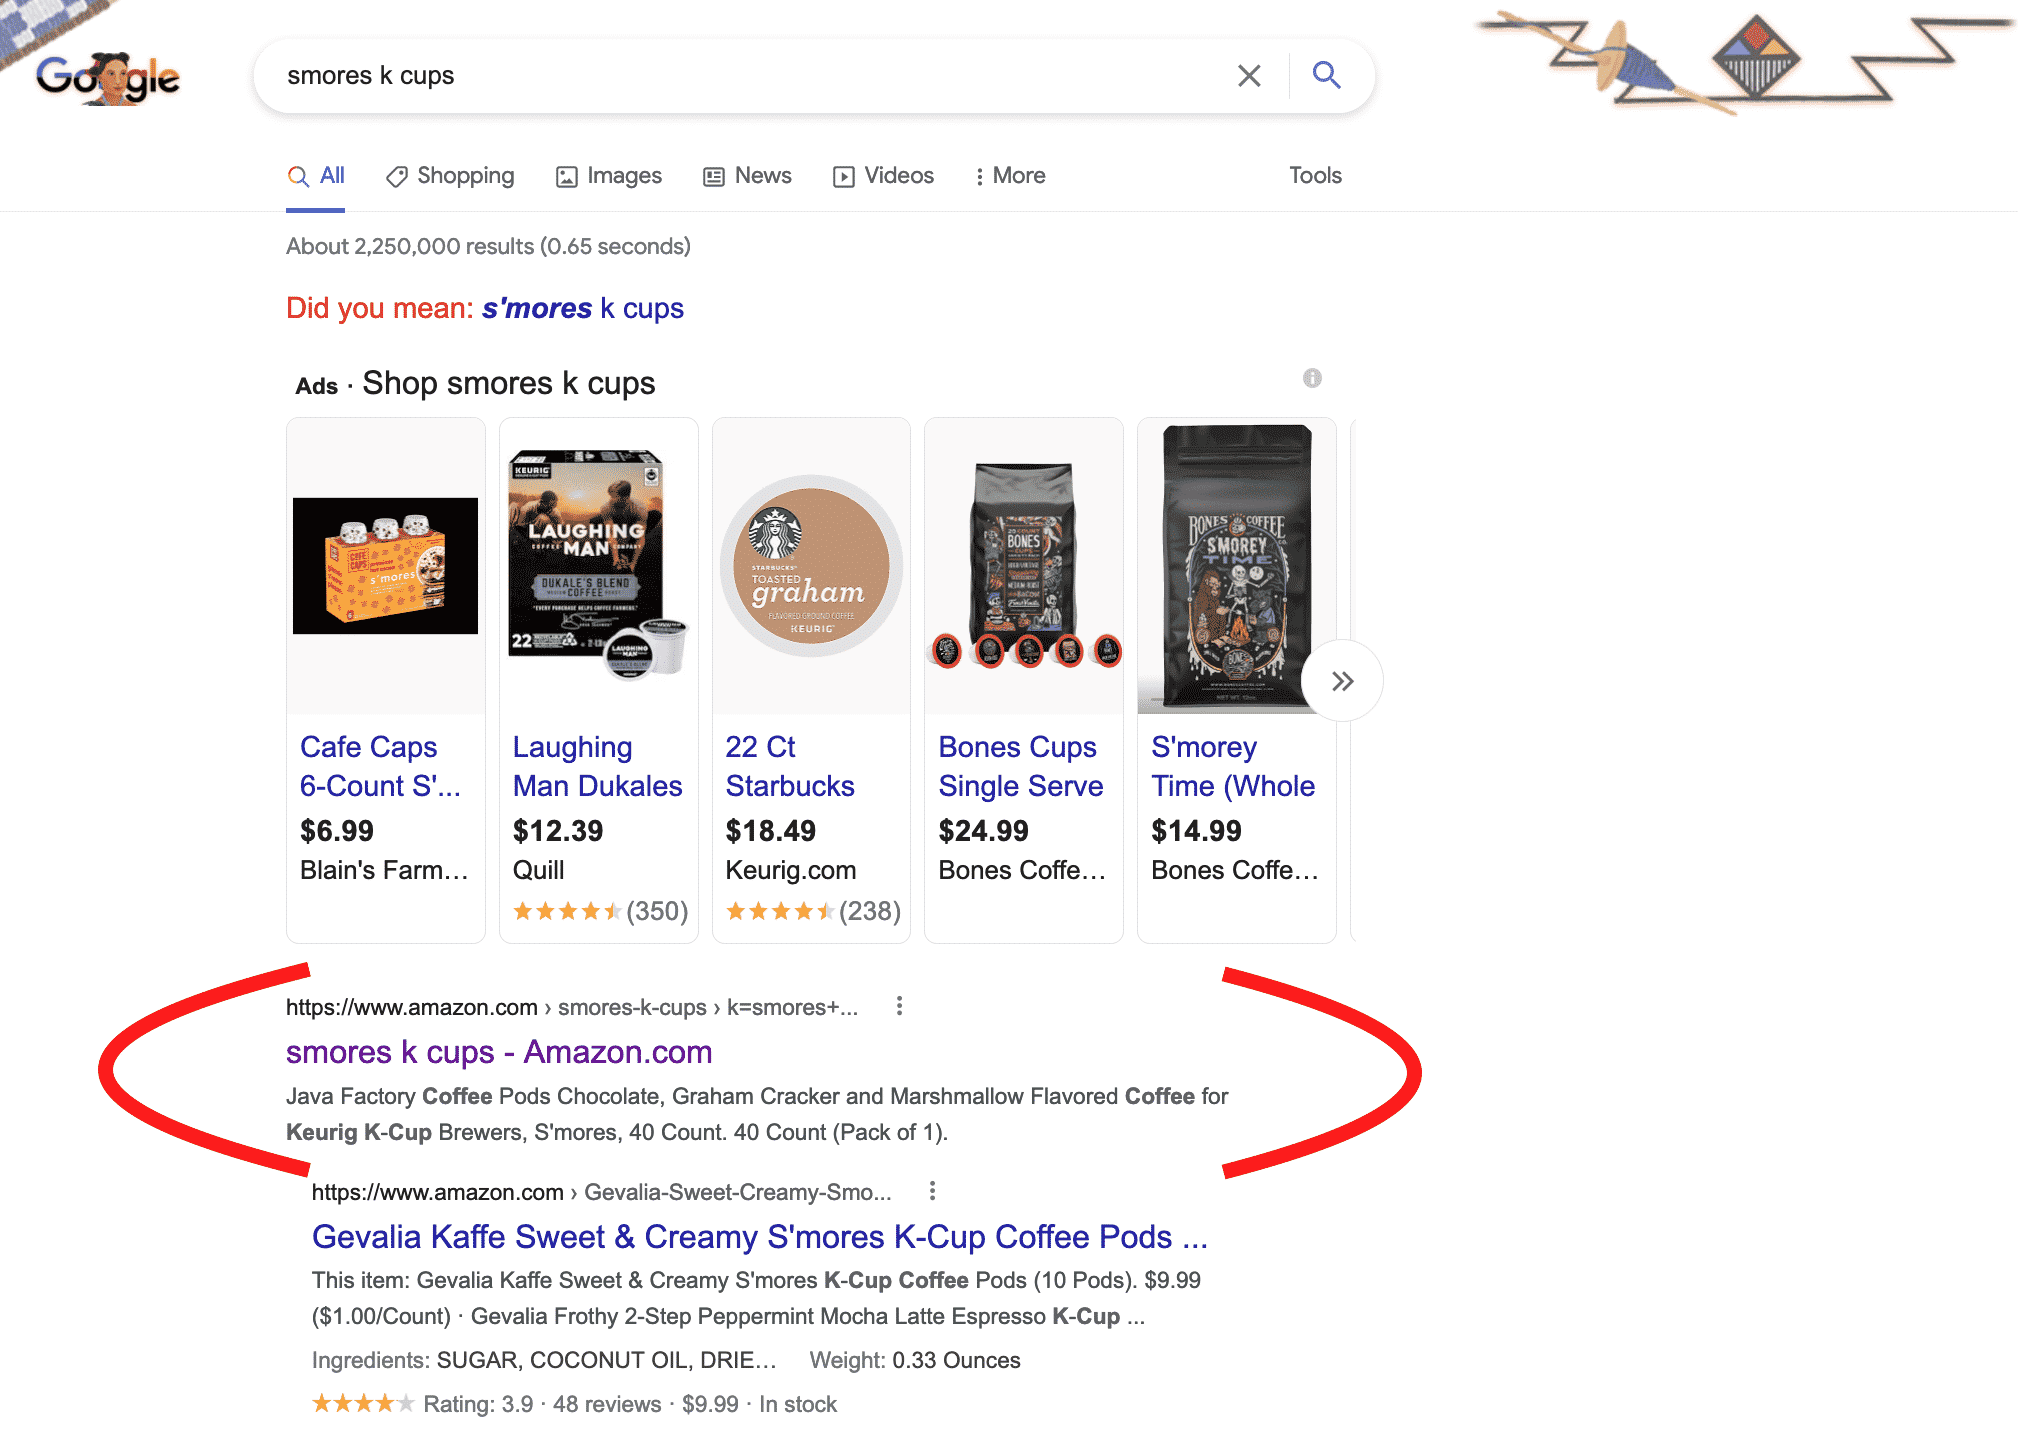 Amazon internal search results showing in Google's search results.